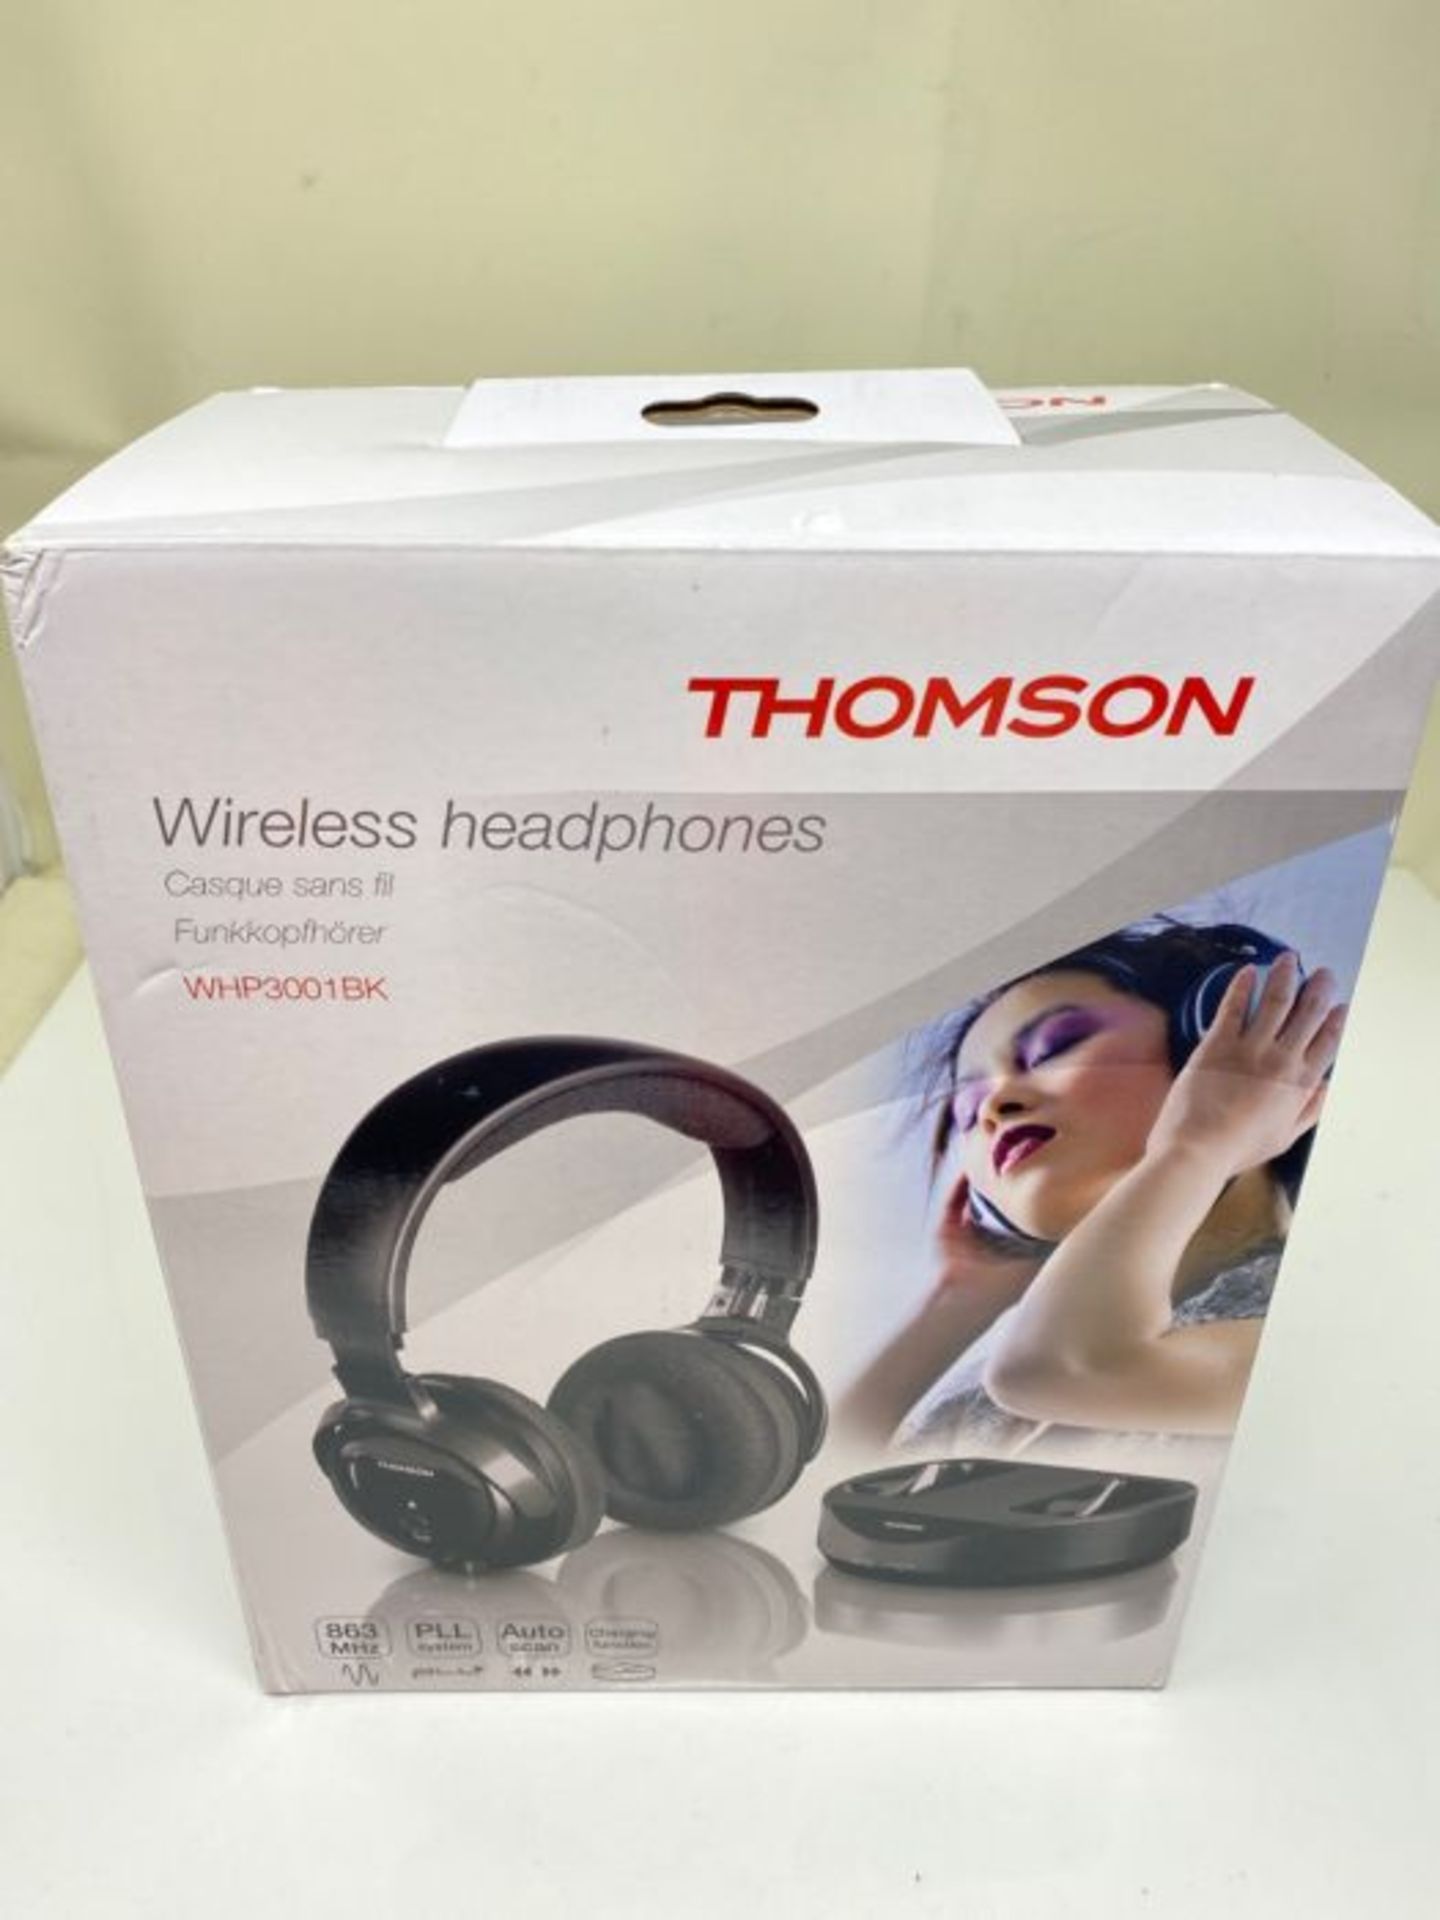 Thomson WHP 3001 Wireless Headphones for Portable Music Players 863 MHz, Black